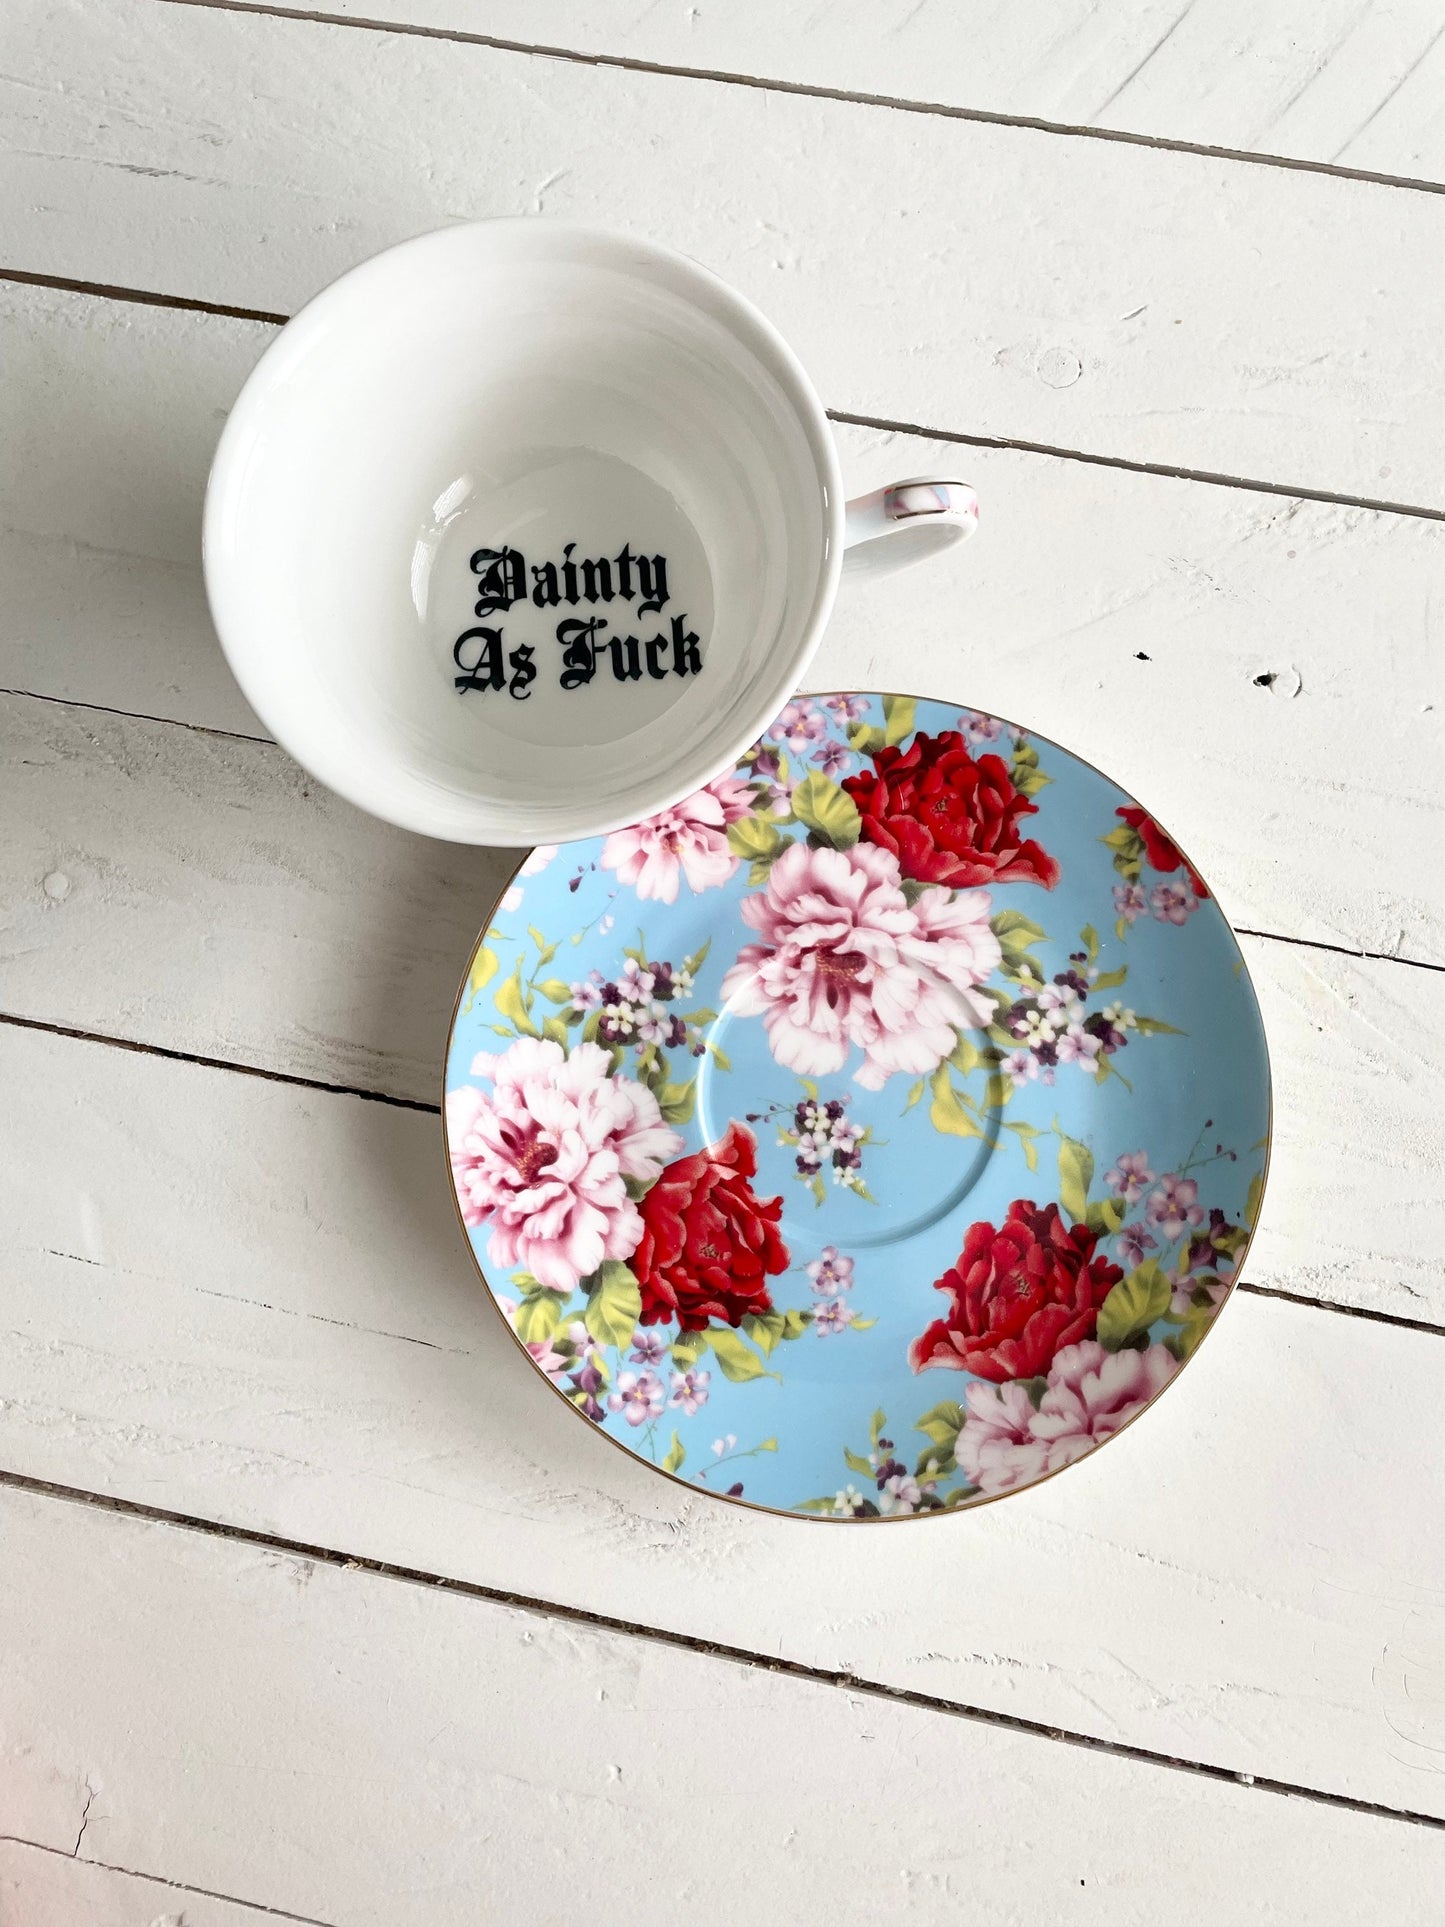 Dainty As Fuck,  Blue and Red Floral Tea cup and saucer